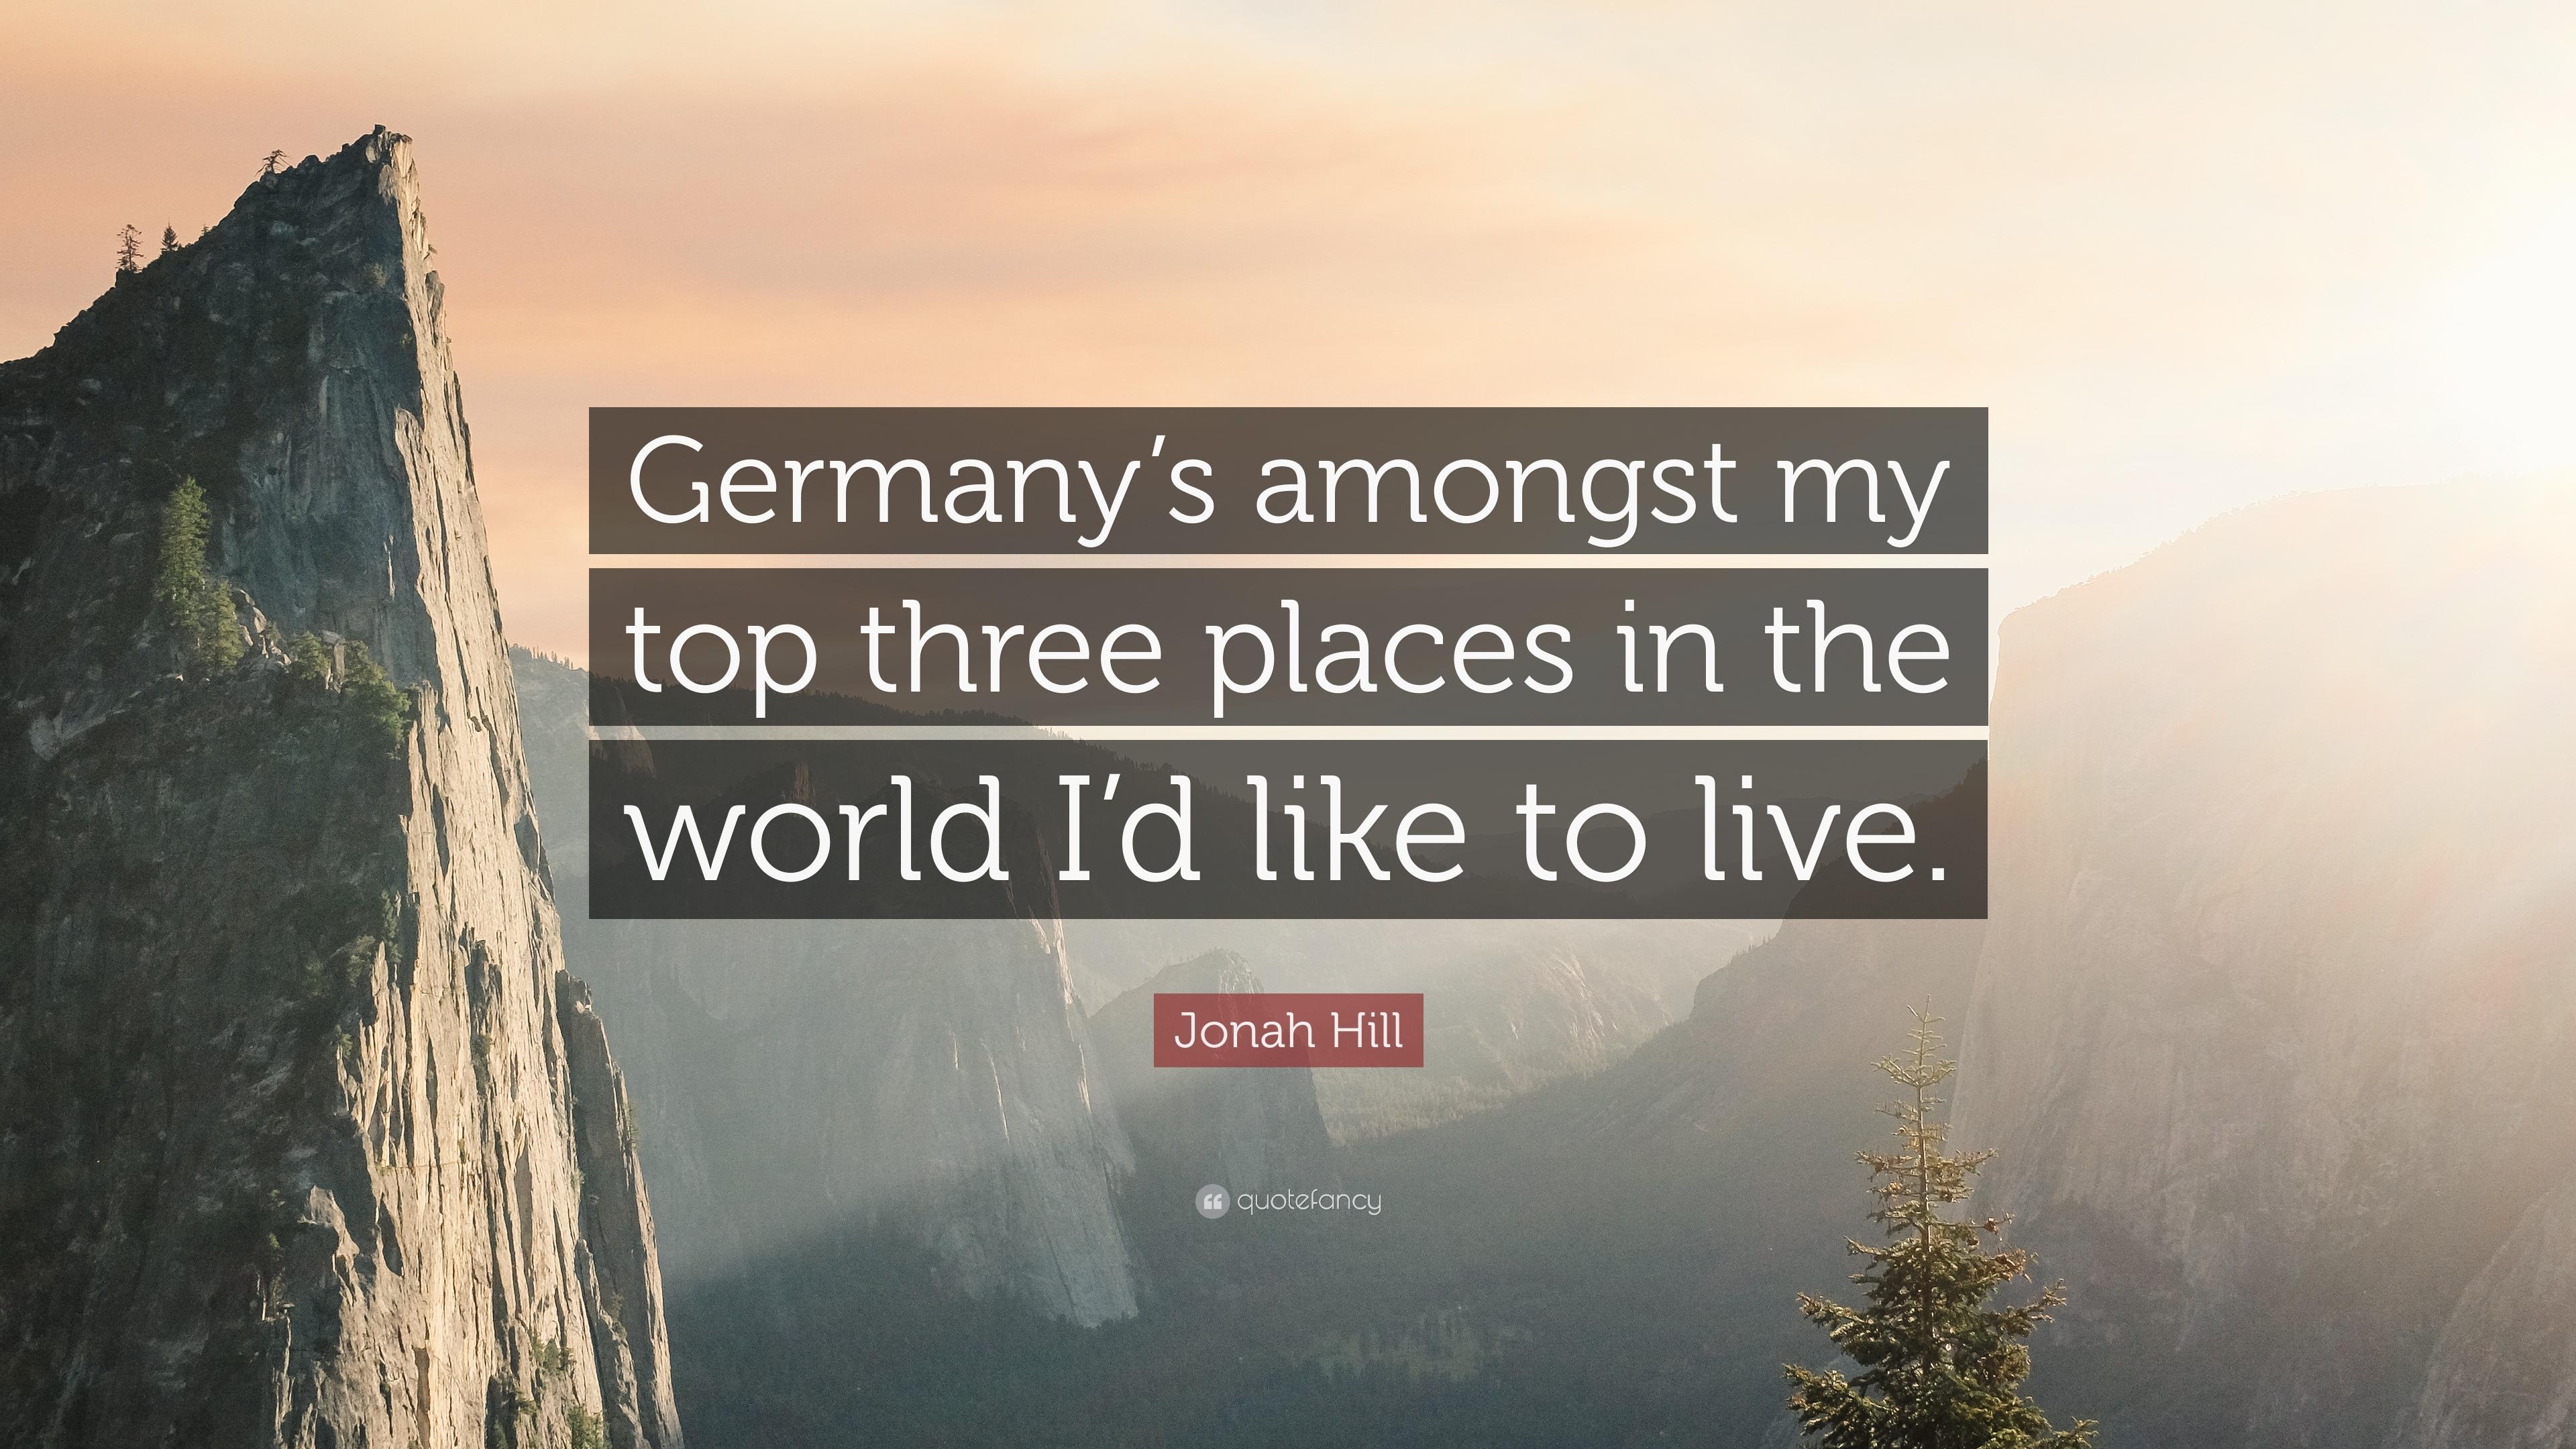 Jonah Hill Quote: “Germany's amongst my top three places in